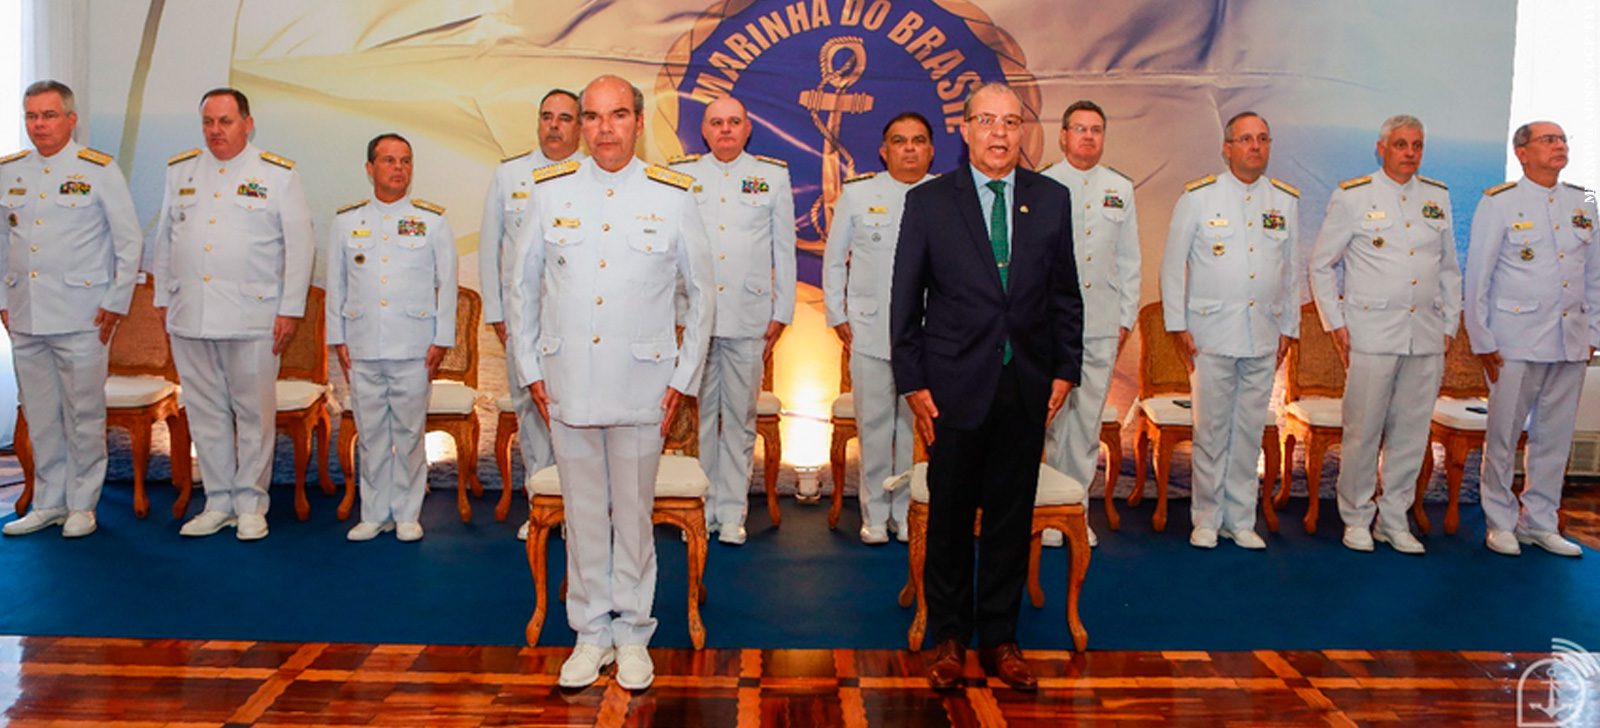 Brazilian Navy has its first Naval Secretary for Nuclear Safety and Quality